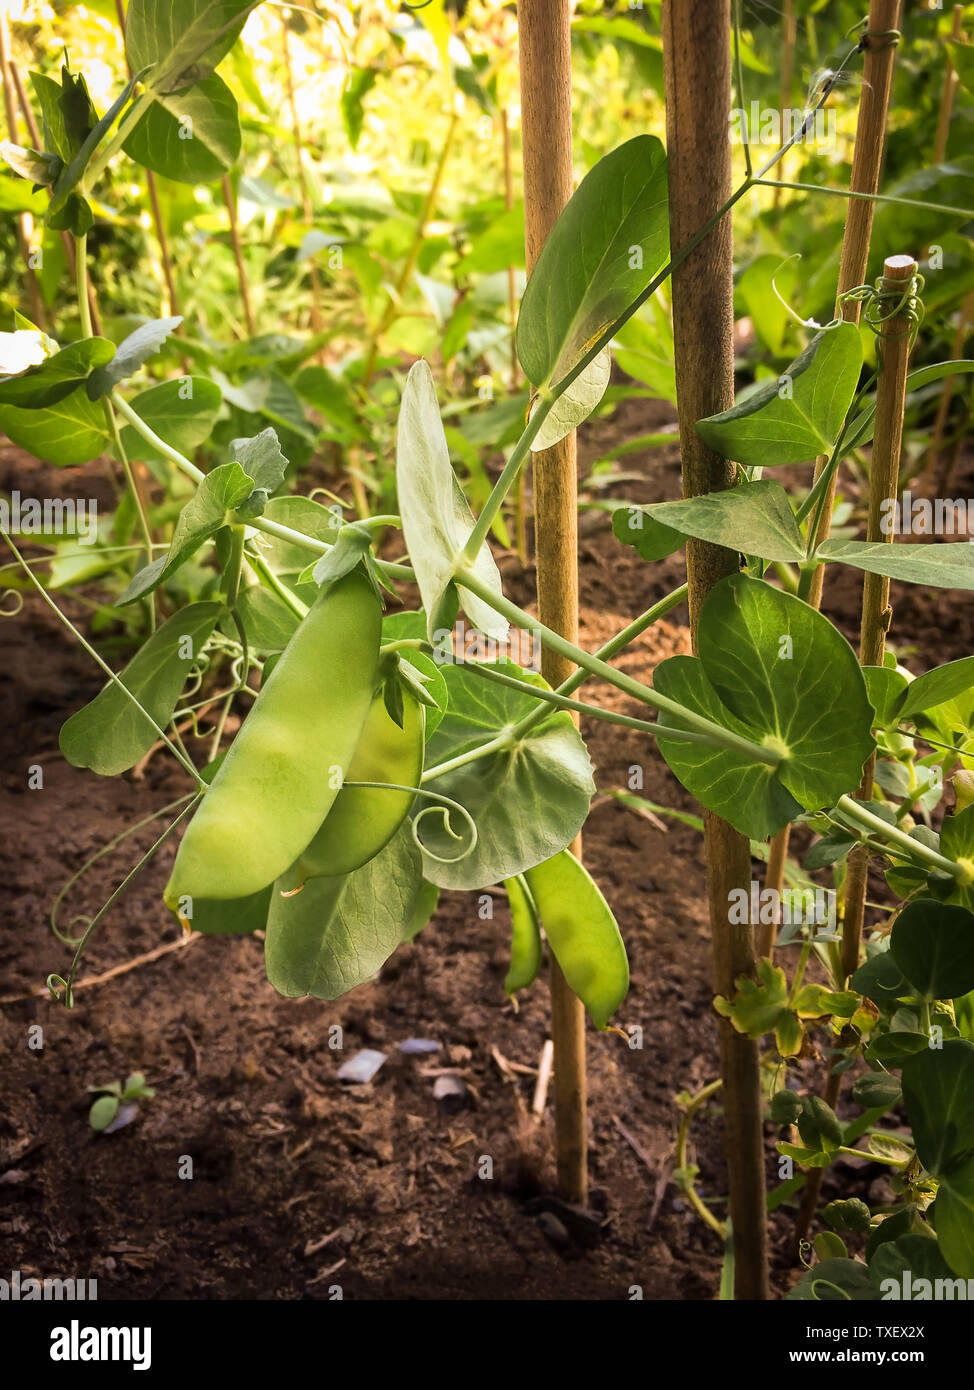 Closeup of ripe fresh and green Snow peas ready for harvest climbing up planting sticks in natural homegrown self-sufficient vegetable garden Stock Photo